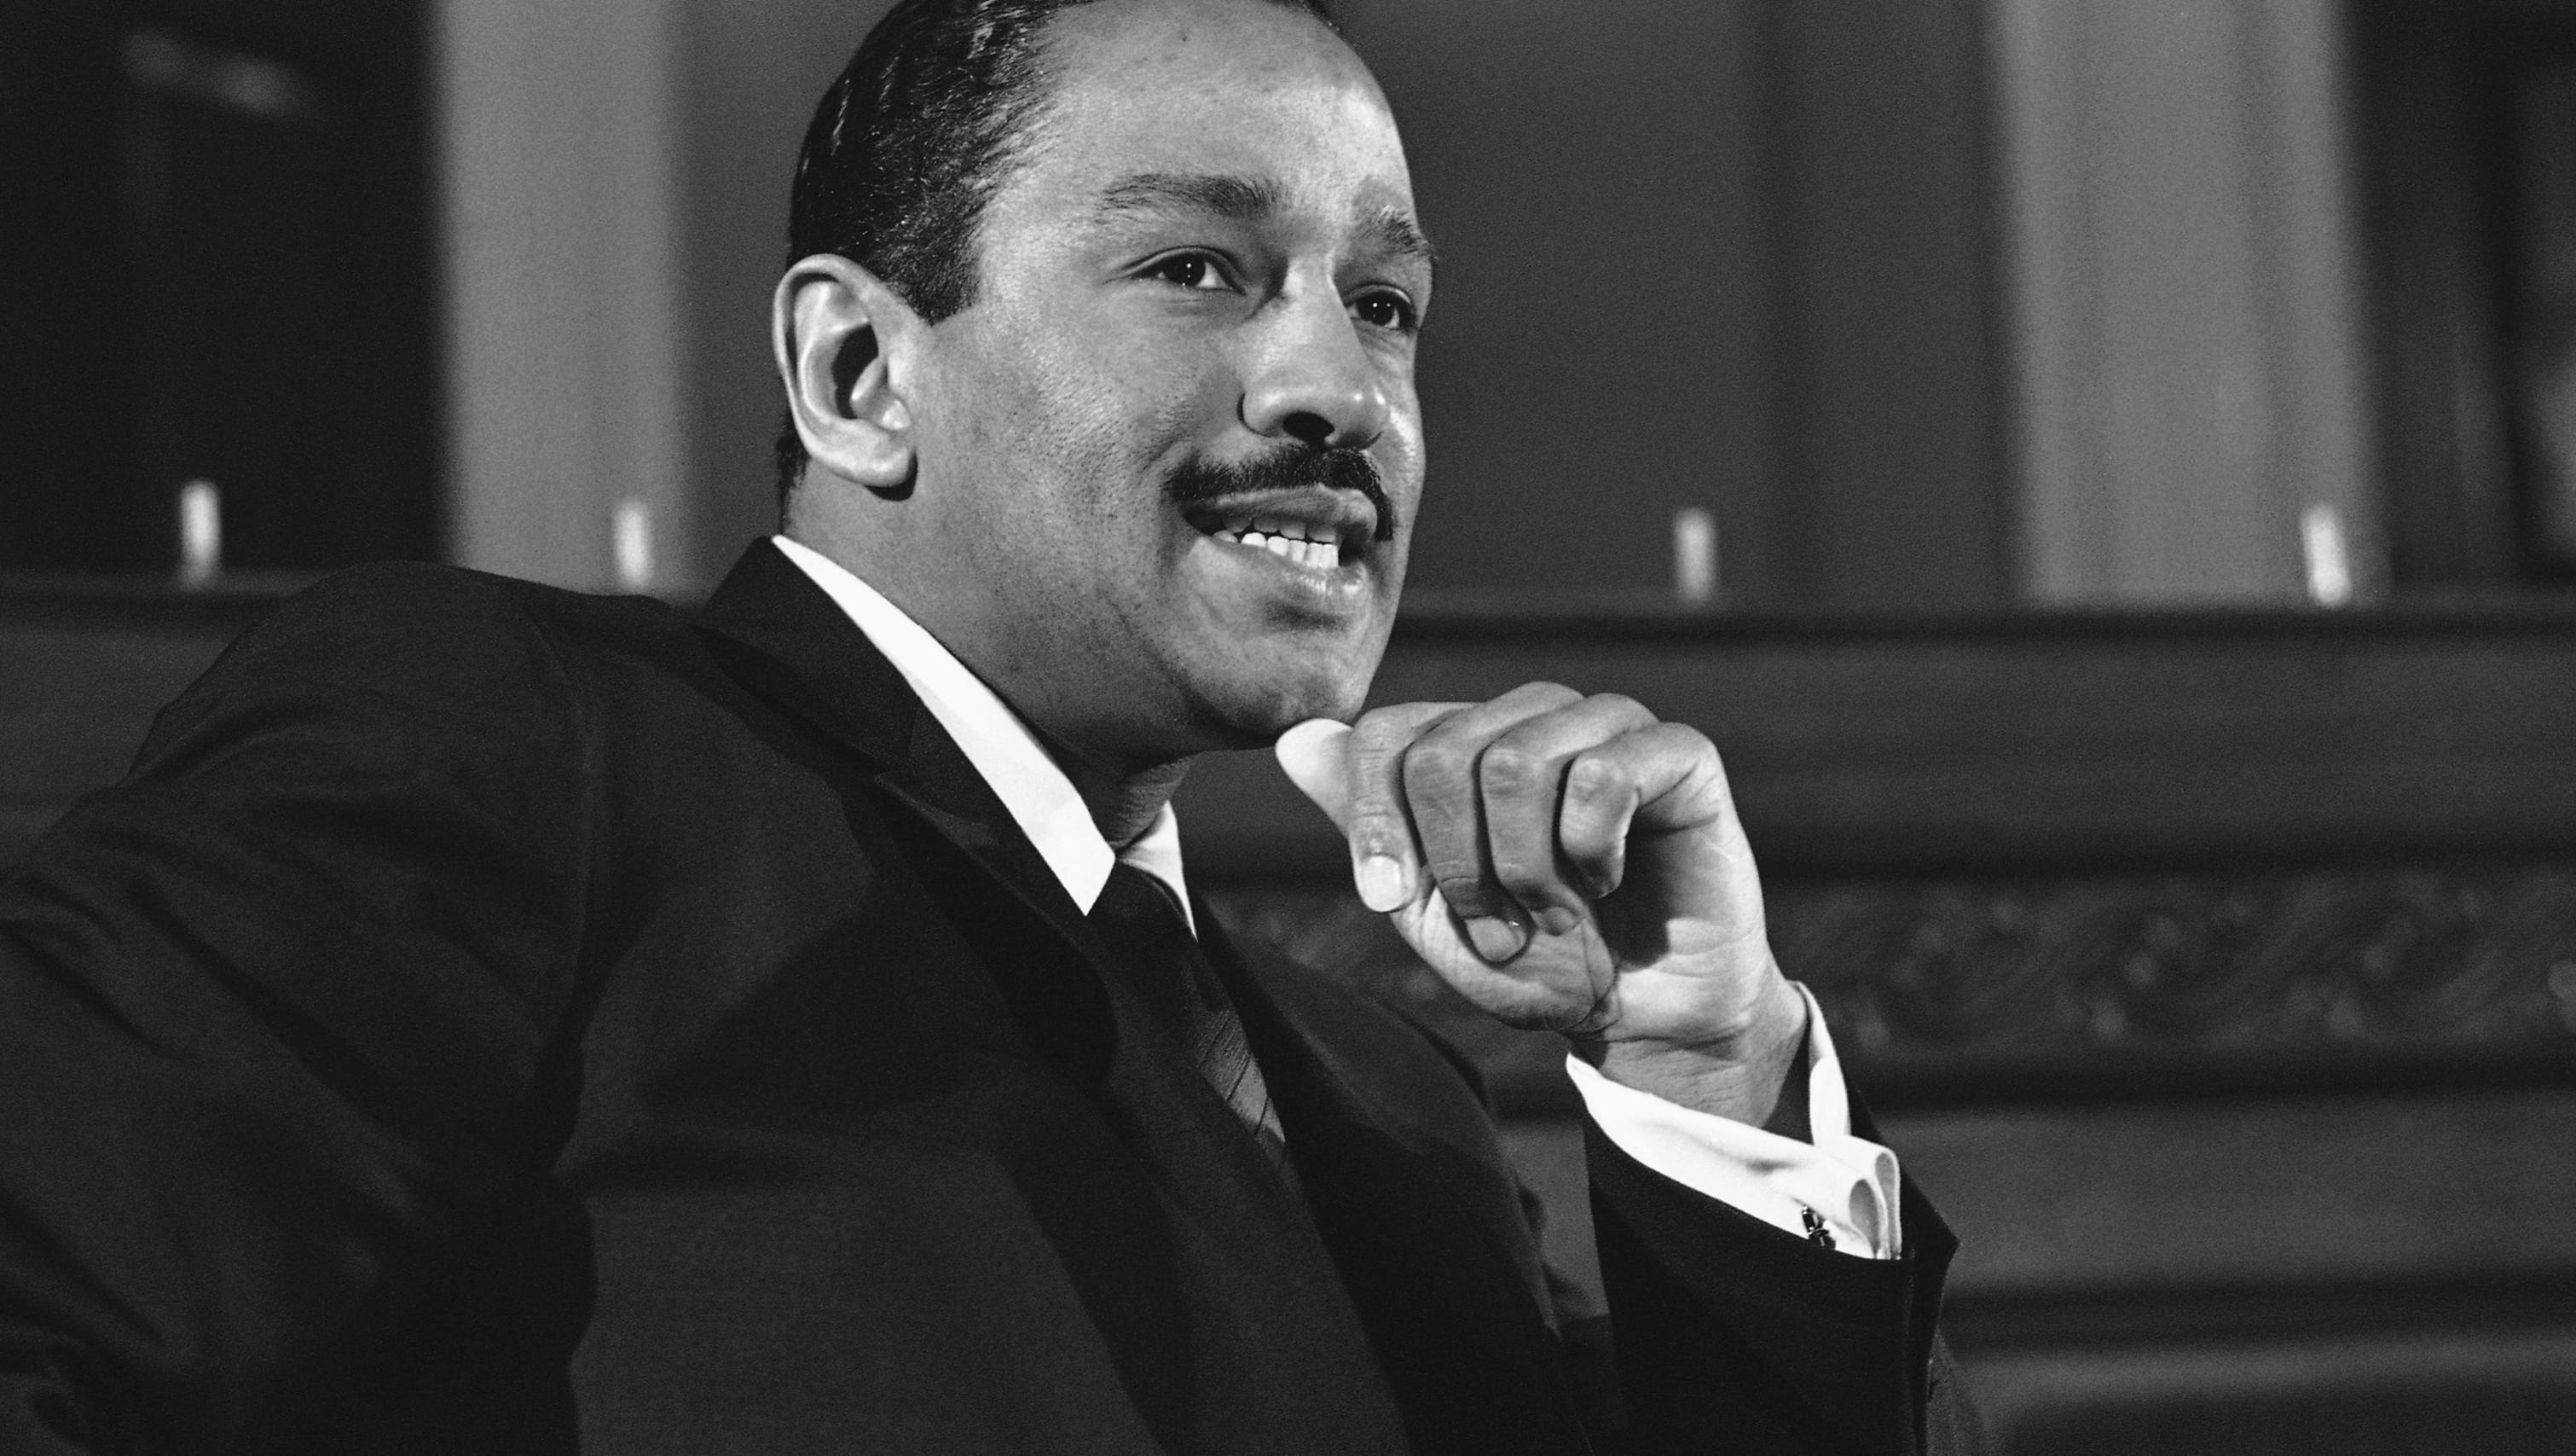 In 1969, Conyers became one of the 13 founding members and dean of the Congressional Black Caucus, formed to strengthen African-American lawmakers' ability to address the legislative concerns of black and minority citizens.